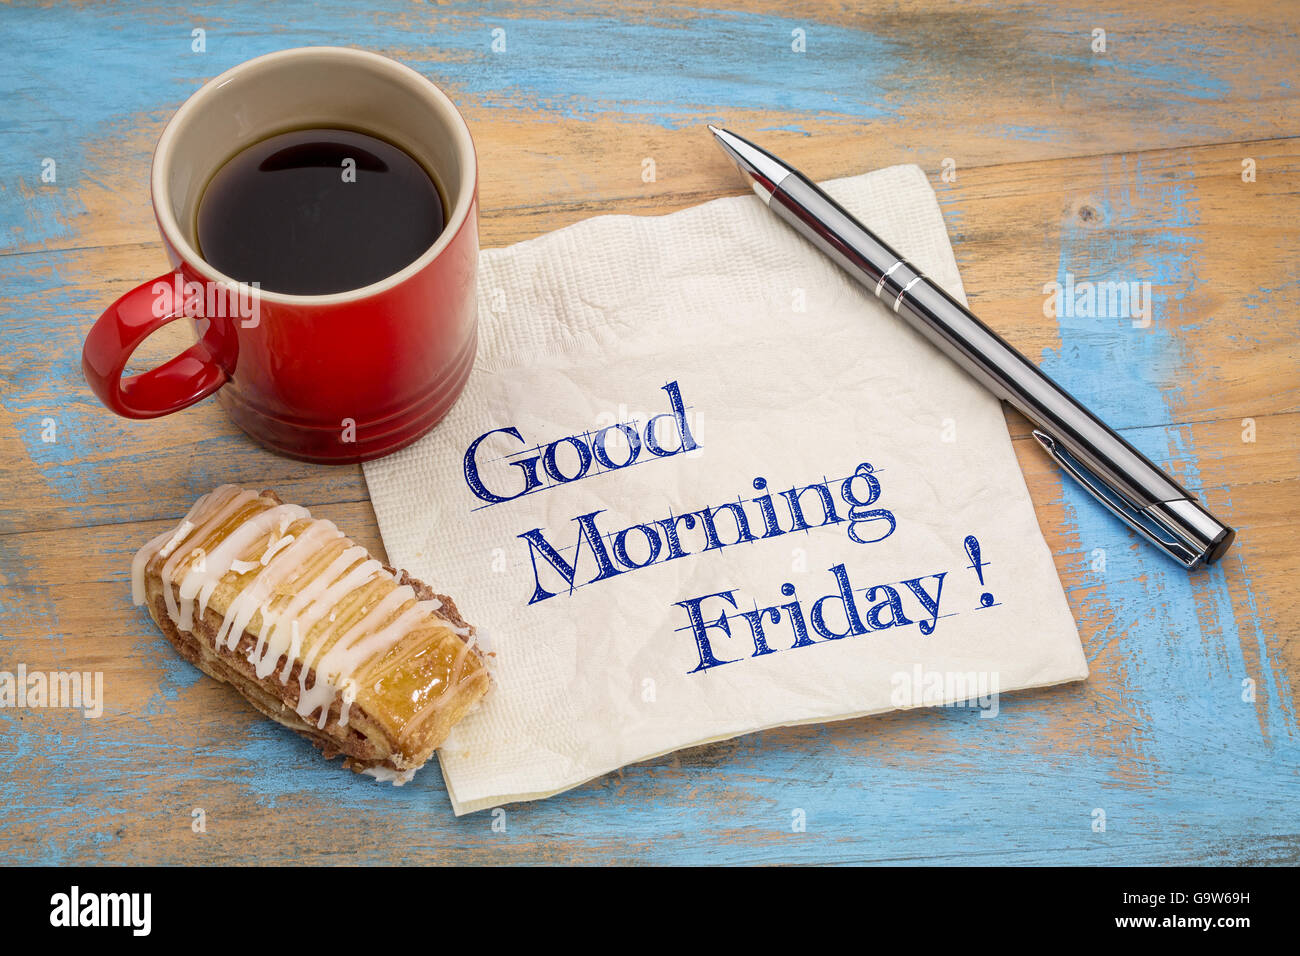 Good Morning Friday - handwriting on a napkin with a cup of coffee and cookie Stock Photo